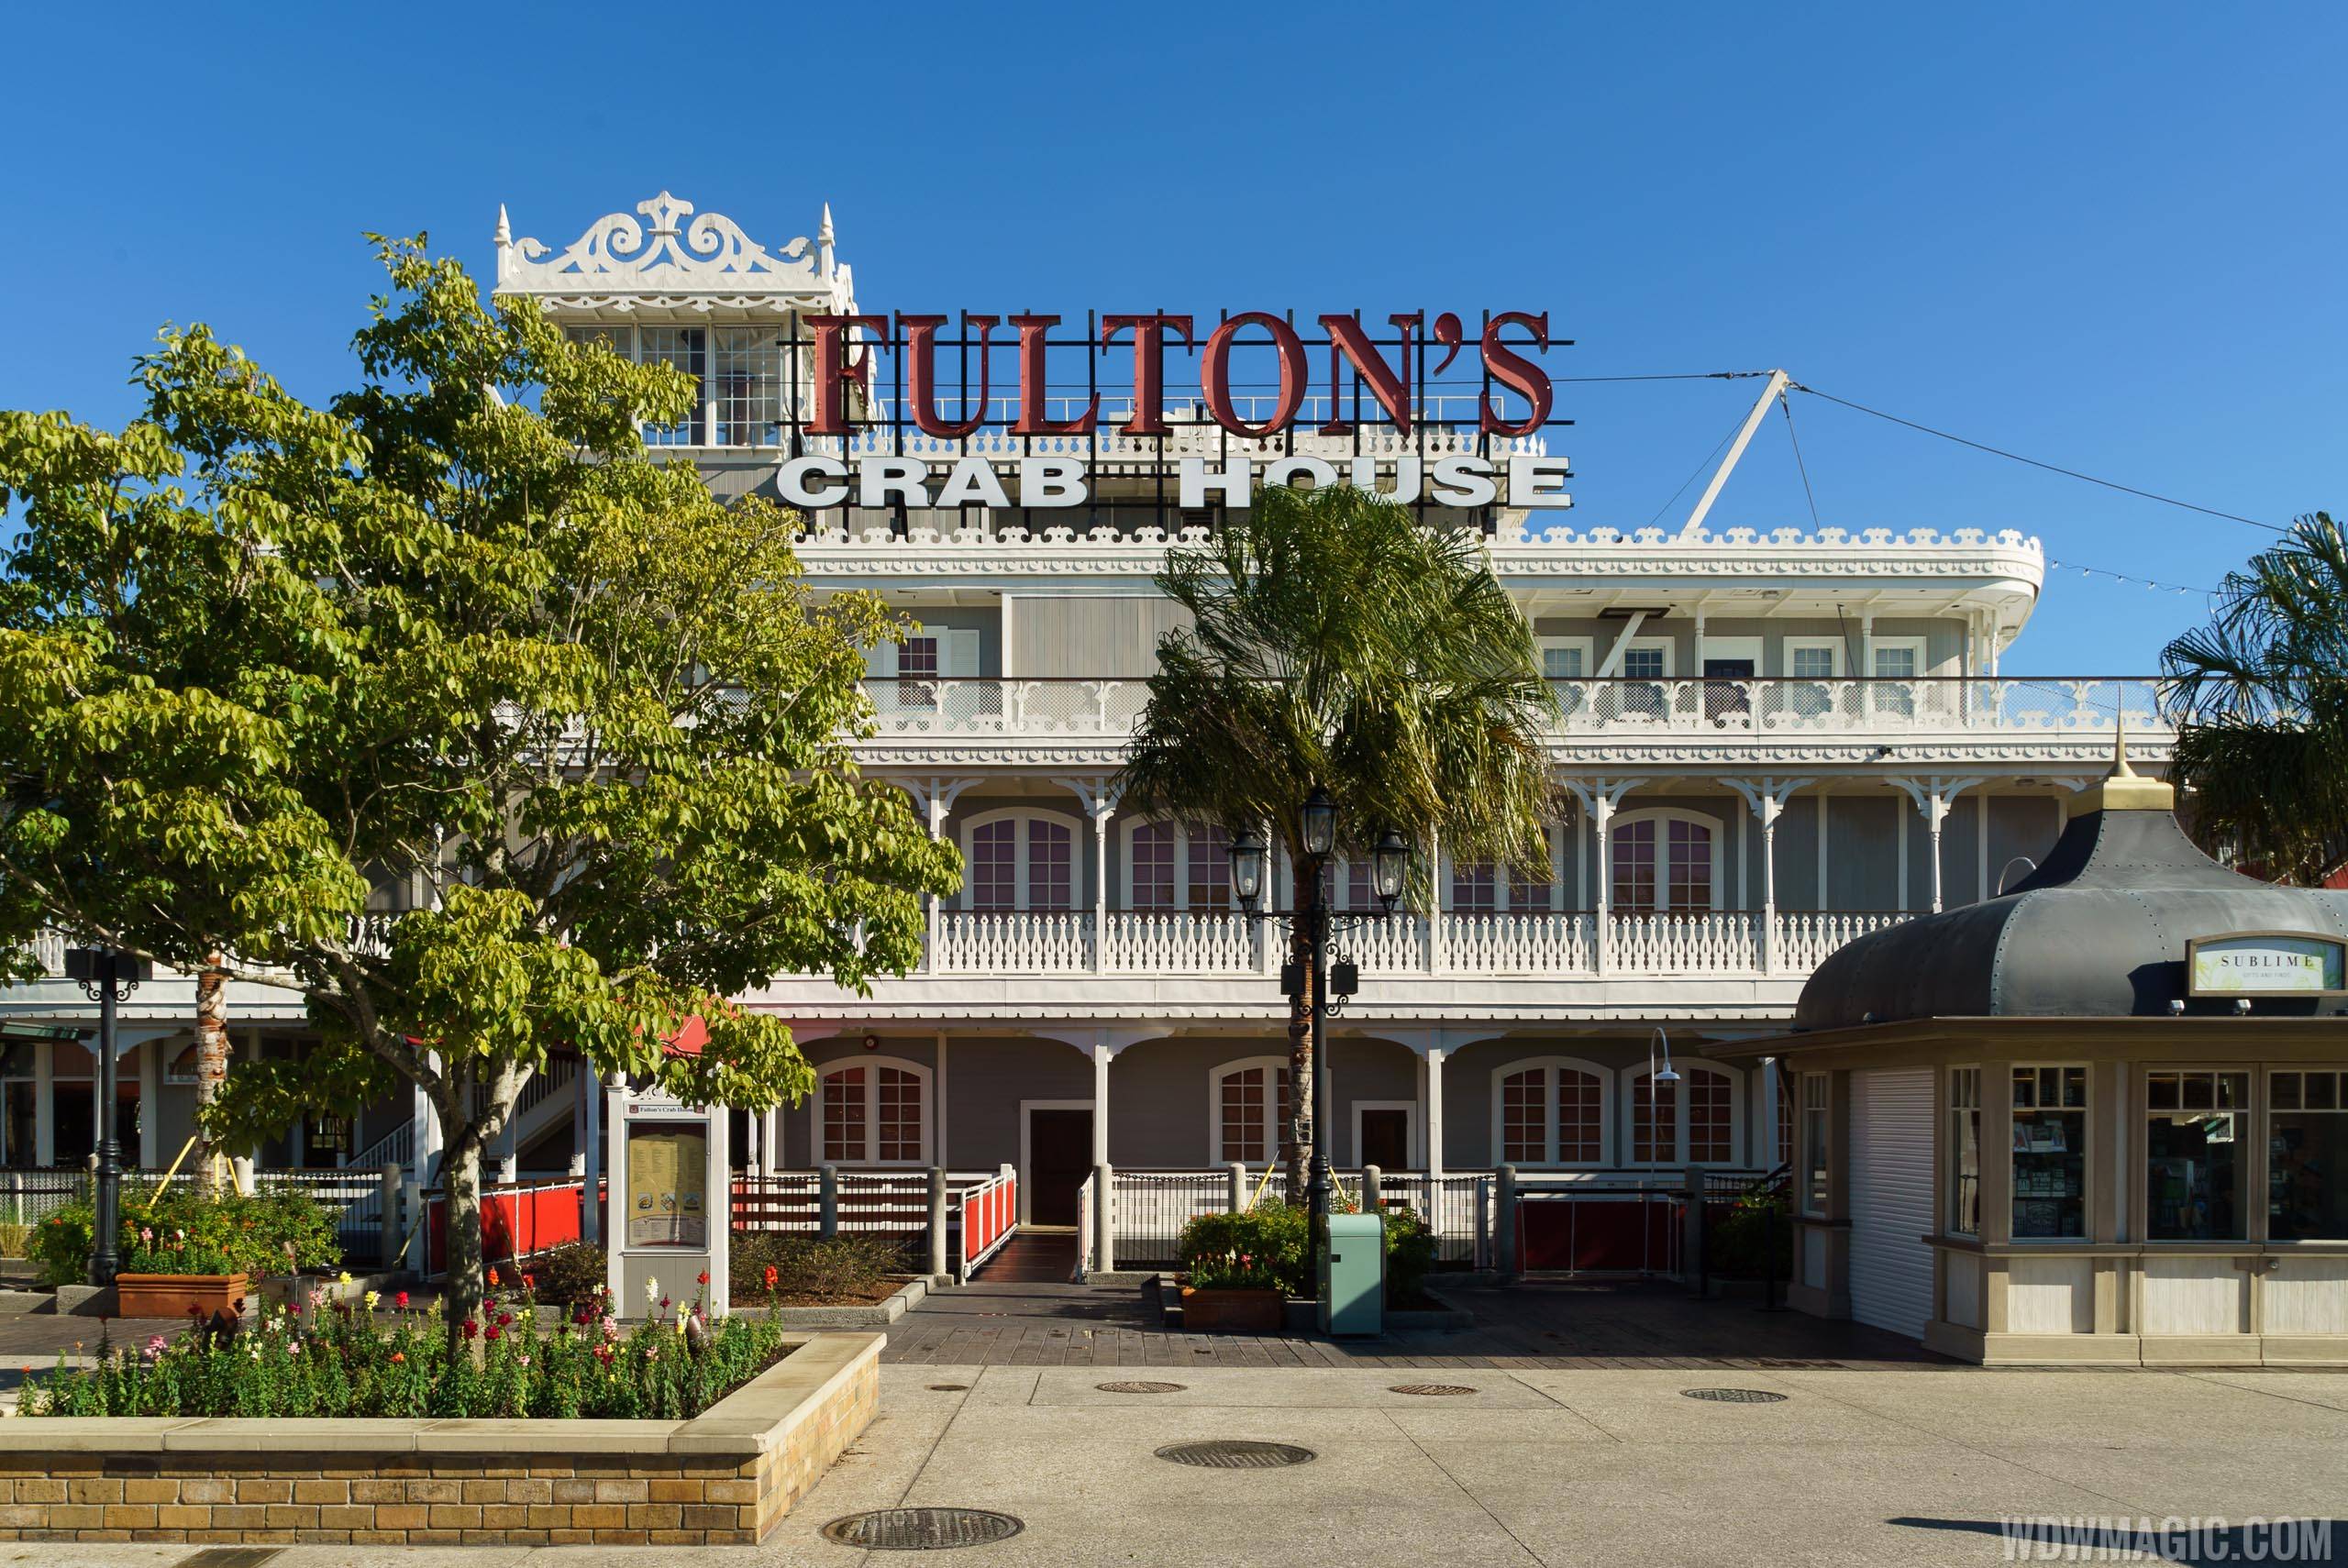 Fulton's Crab House at Disney Springs closing for major remodel later this year